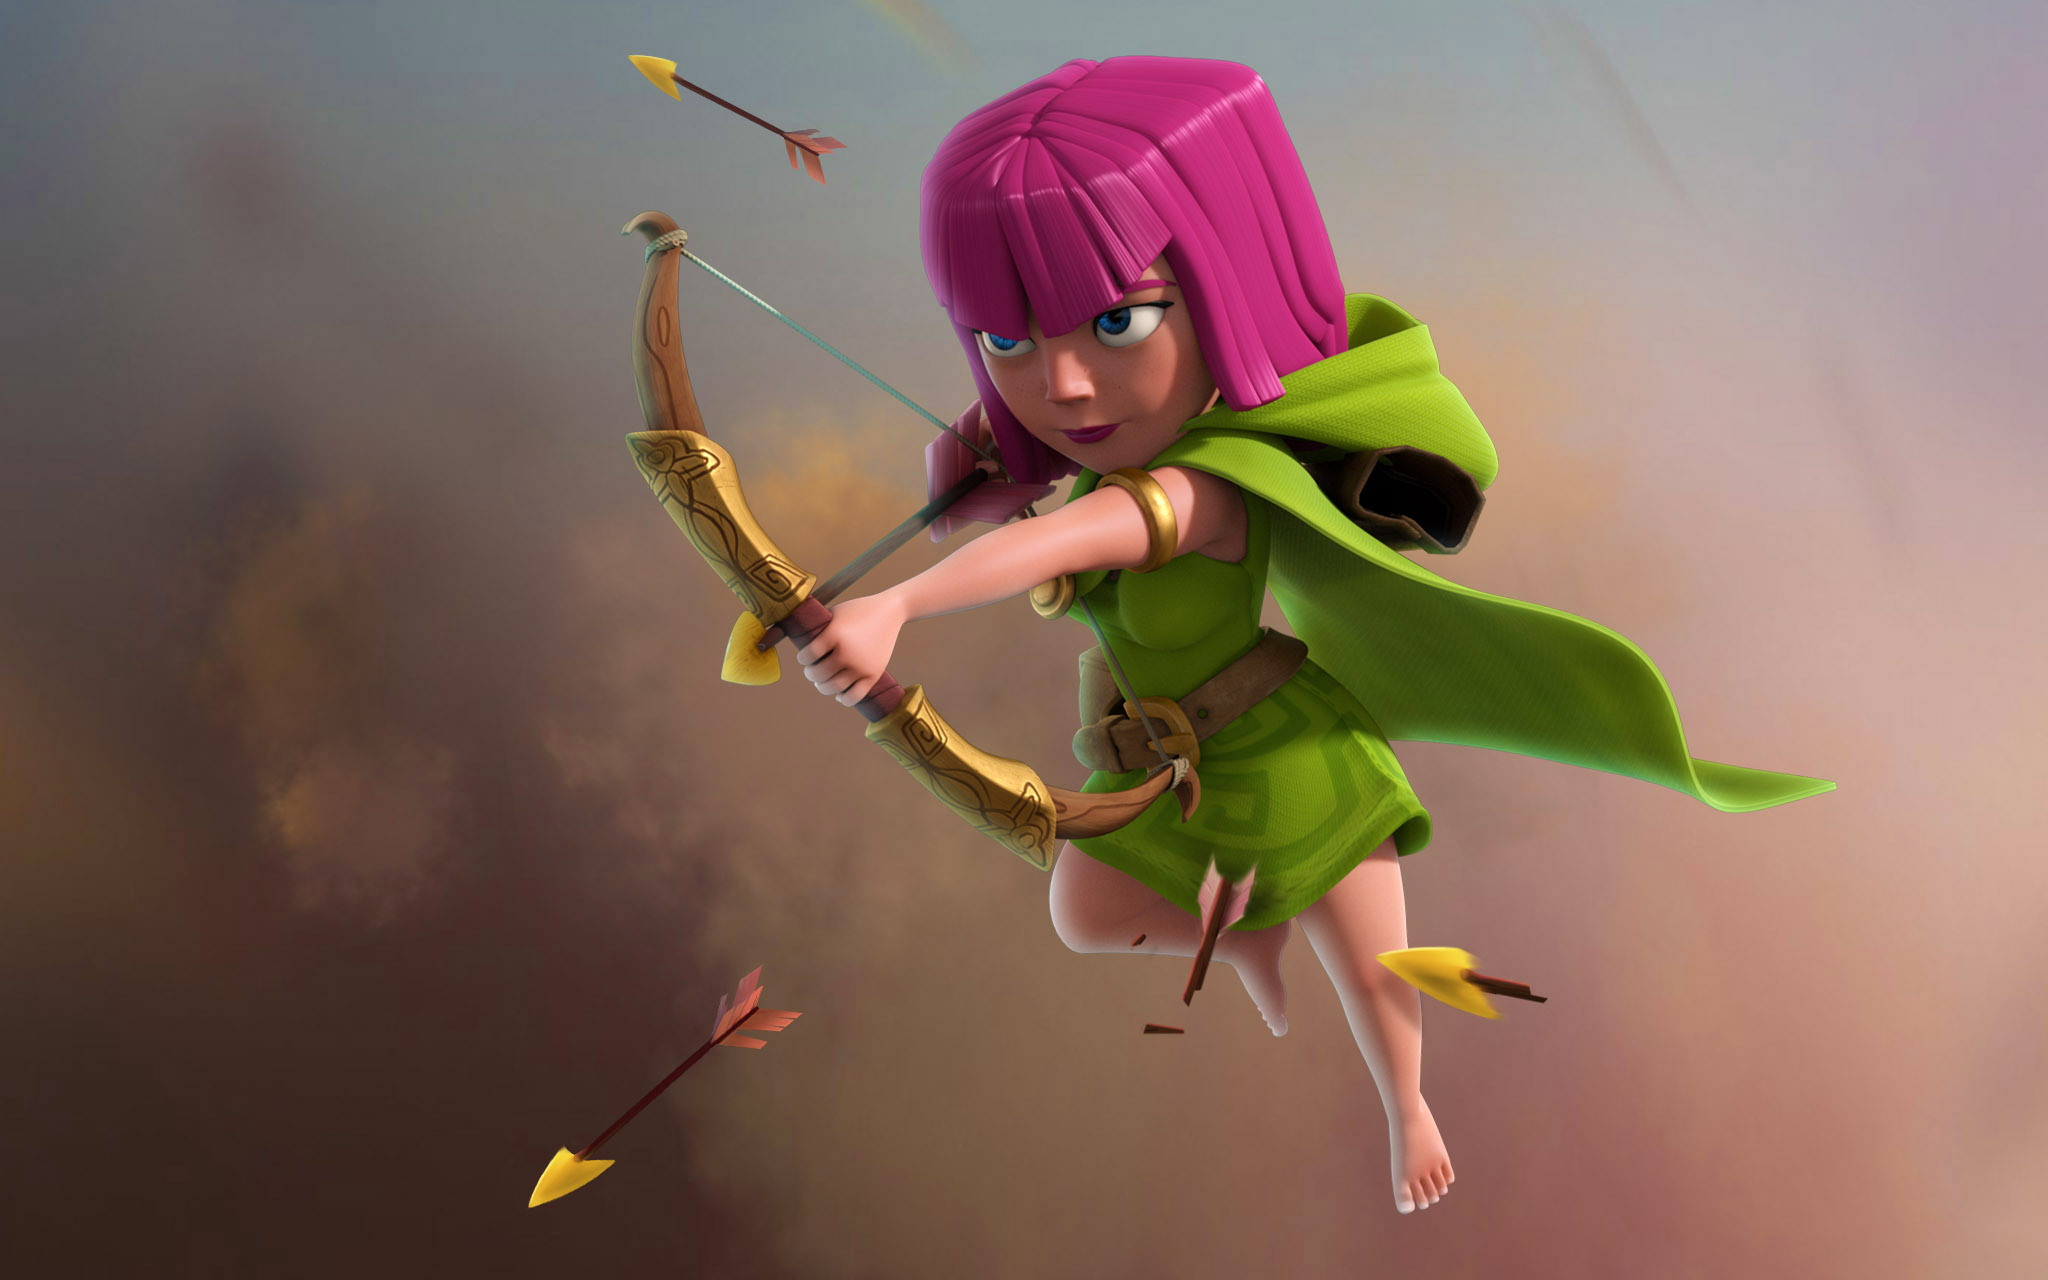 Video Game Characters Video Game Girls Archery Clash Of Clans Video Game Art CGi Pink Hair Arrows Cl 2048x1280